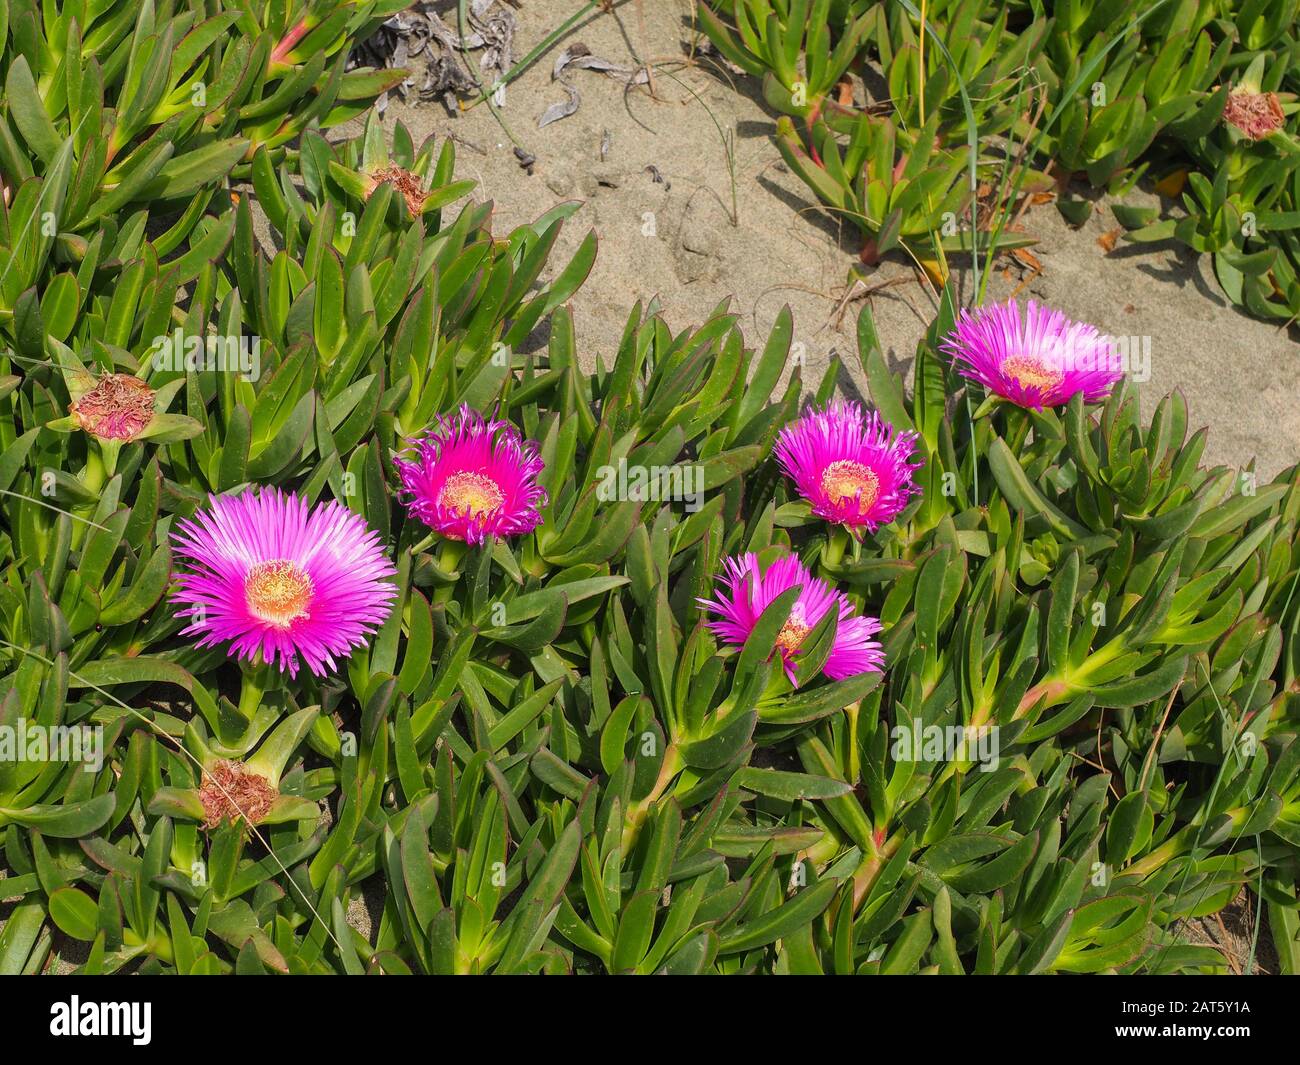 Pink sea fig blossom in sandy background. Carpobrotus chilensis or Carpobrotus edulis flower, weed plant with succulent leaves in the family Aizoaceae Stock Photo